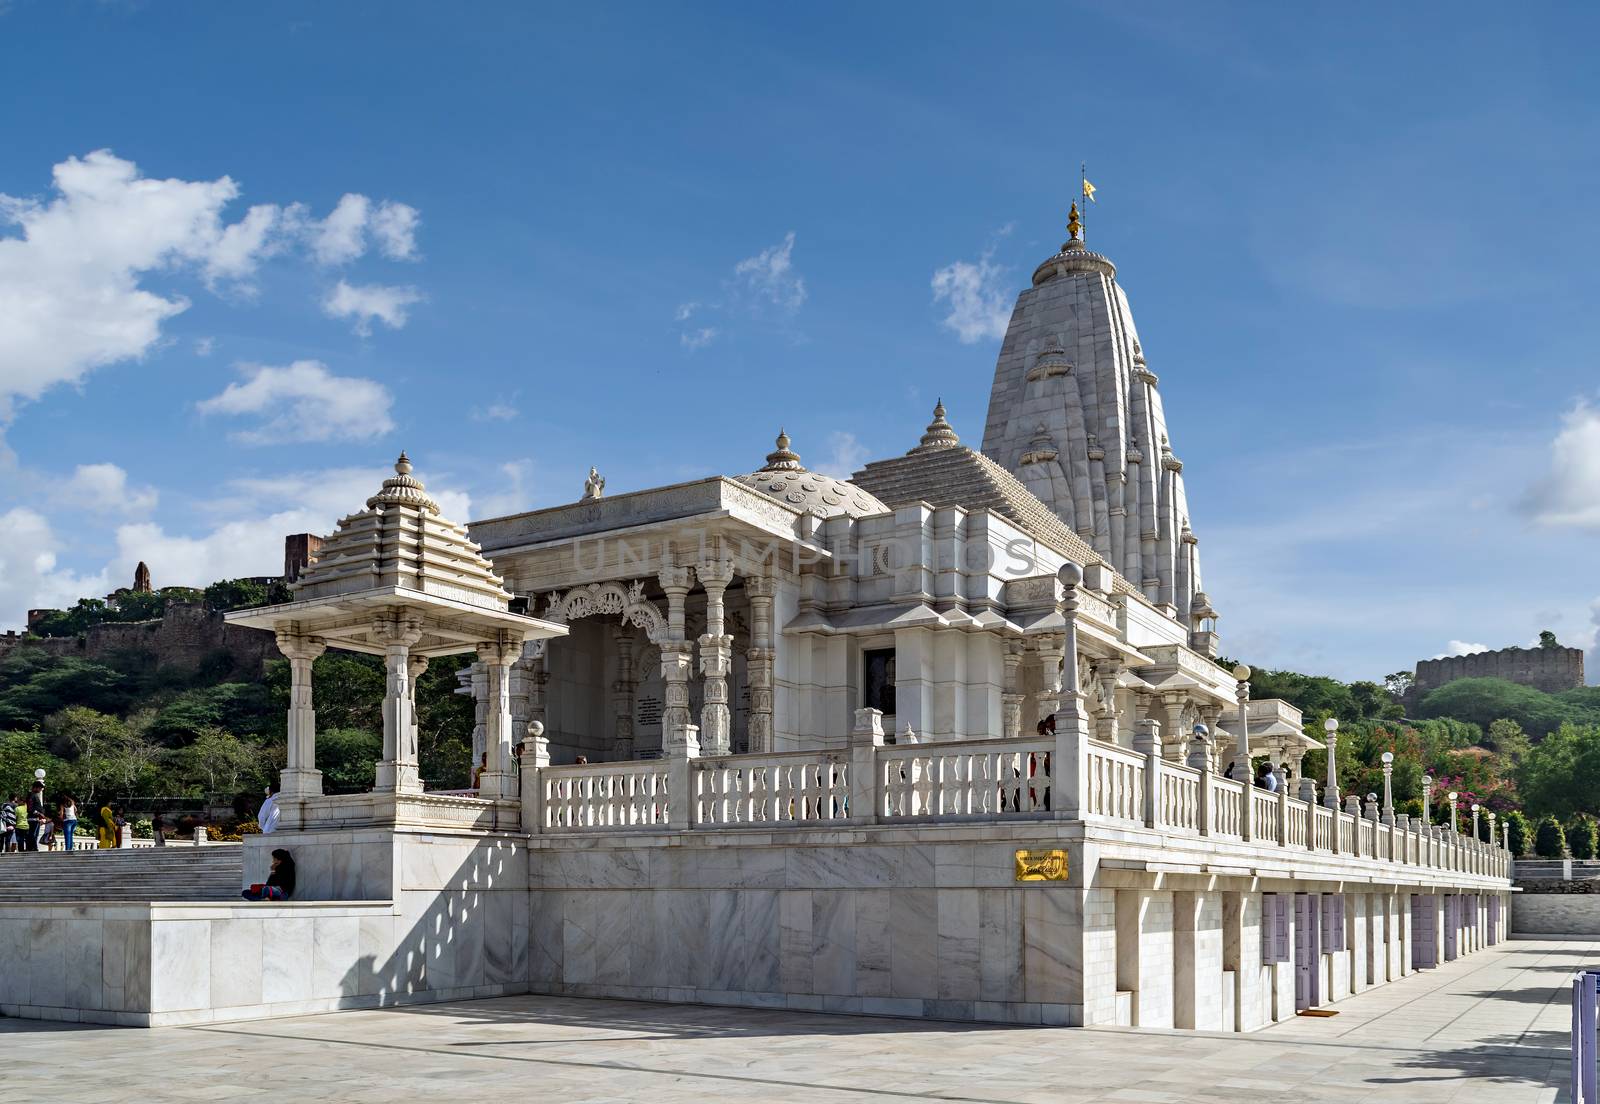 Birla Temple which is also known as Laxmi Narayan temple, is a famous tourist attraction spots of Jaipur, Rajsthan, India.